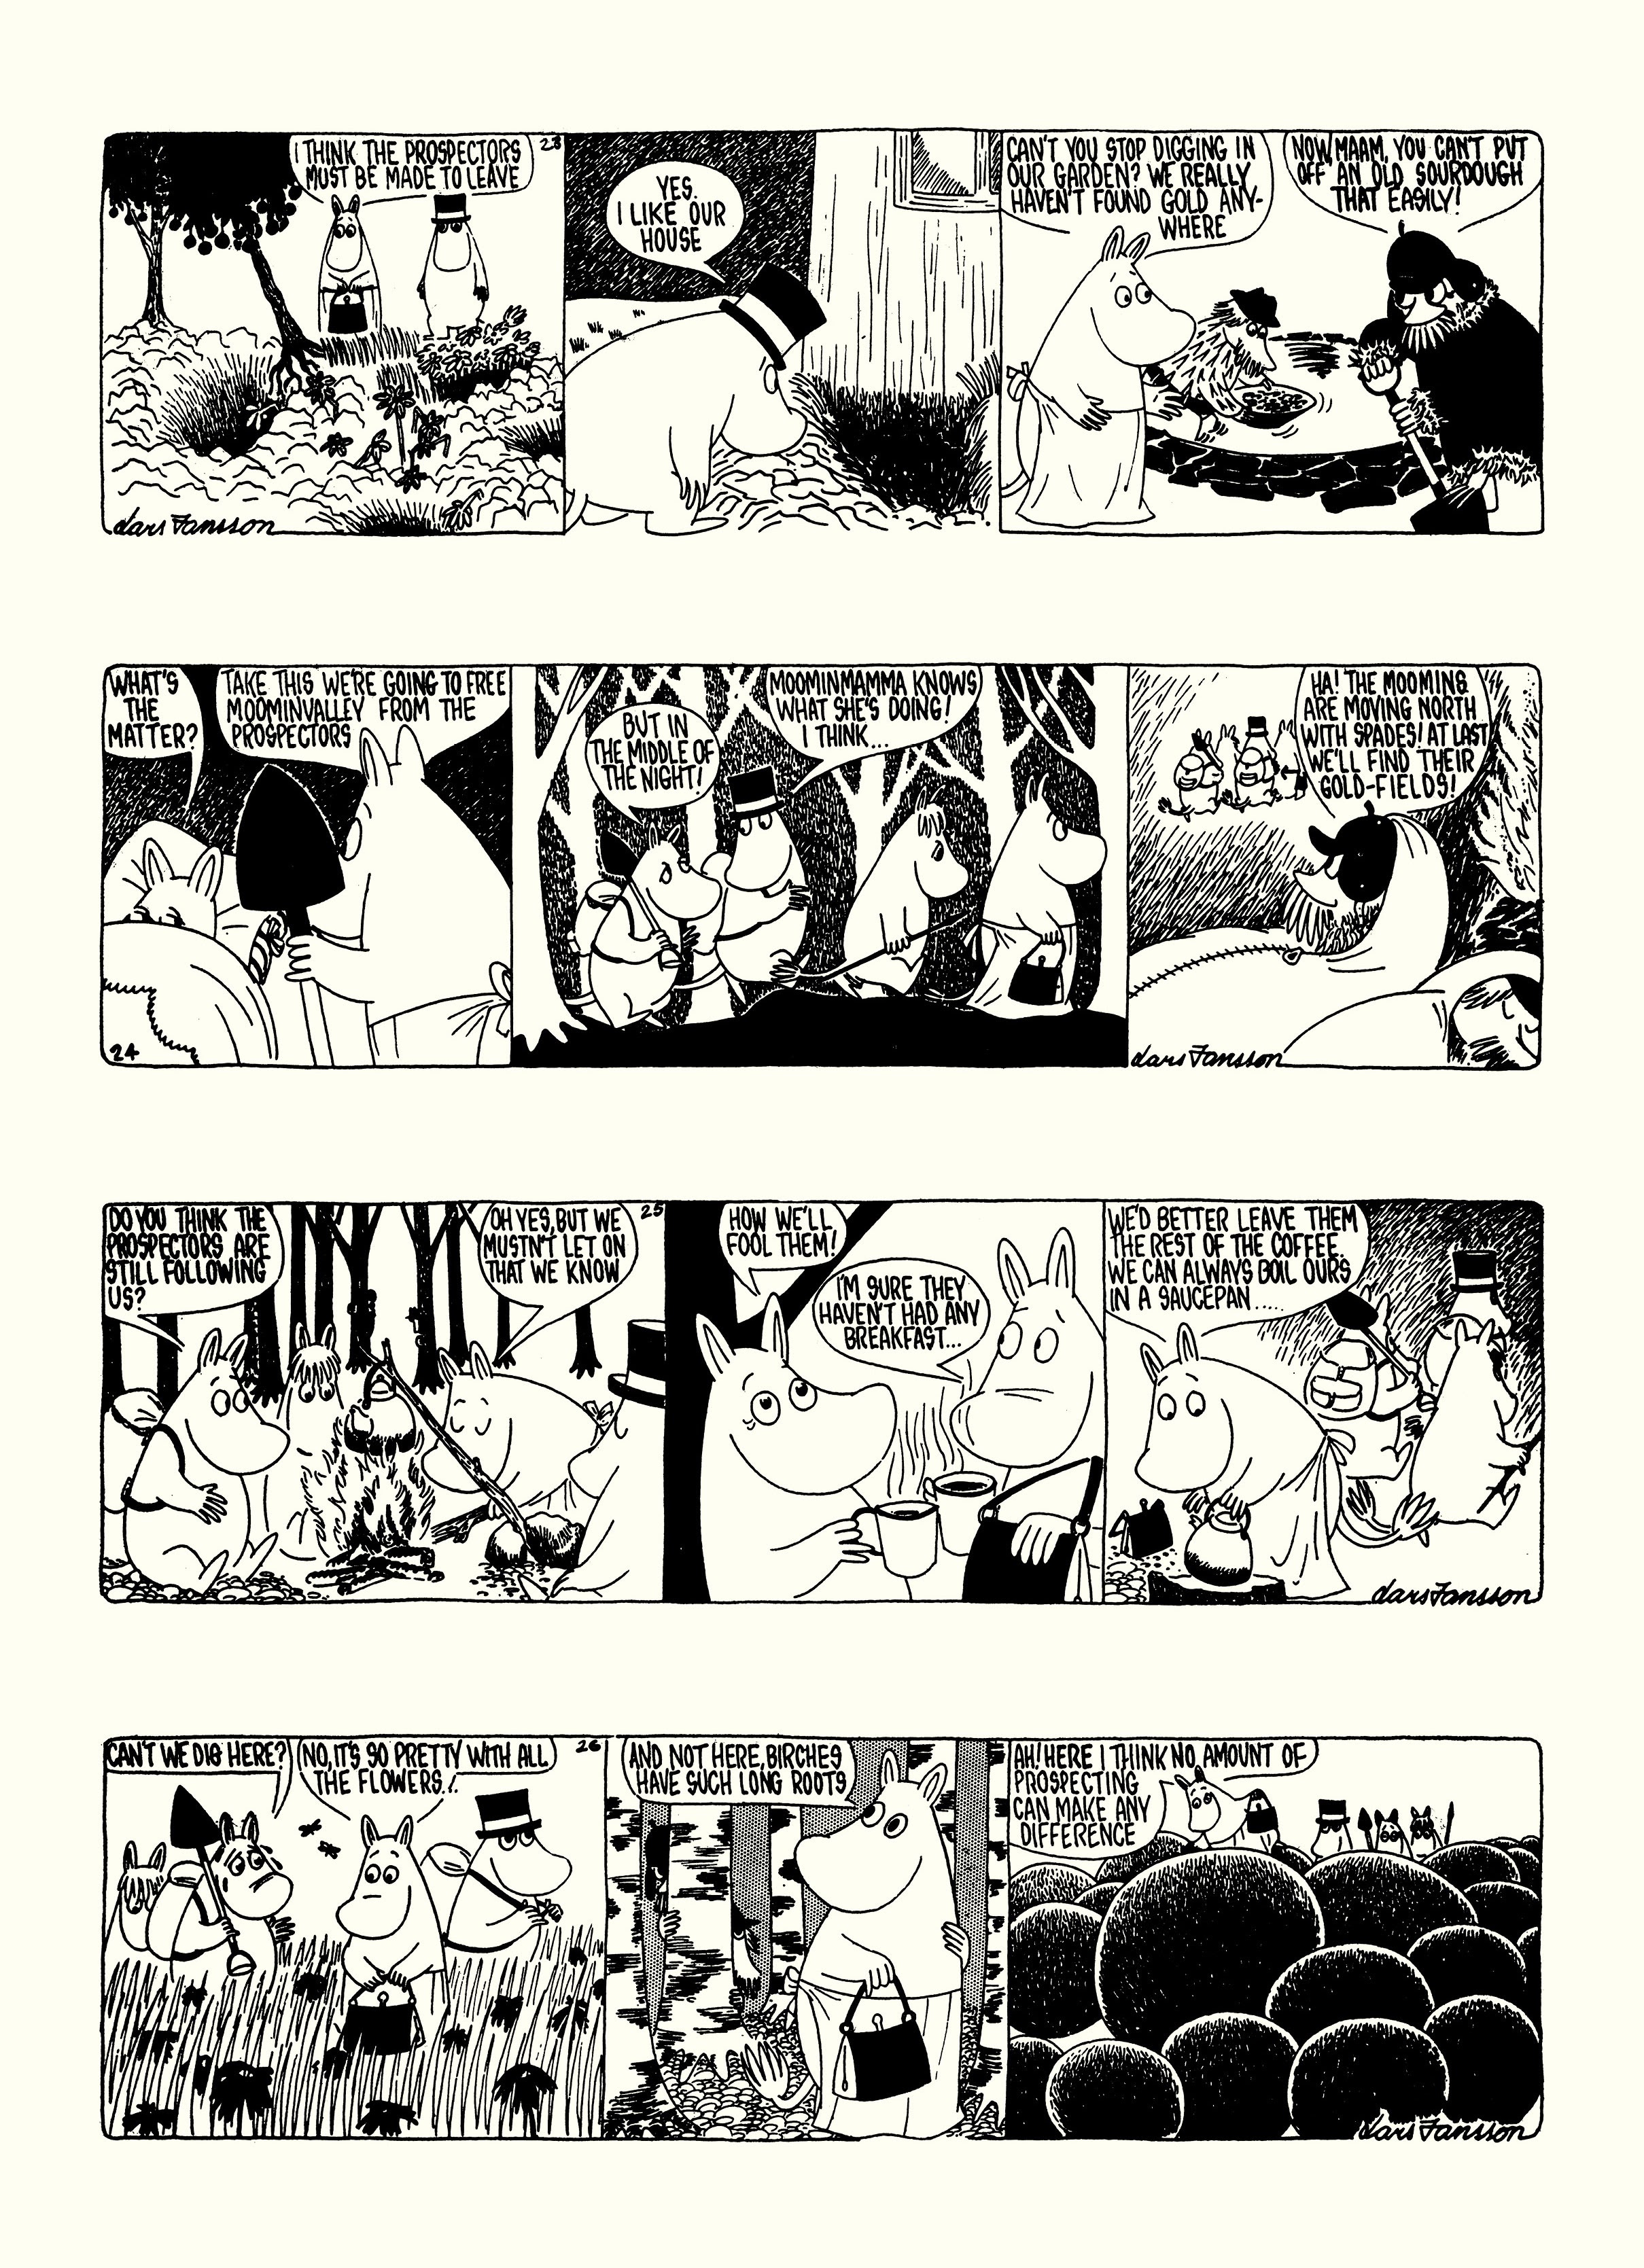 Read online Moomin: The Complete Lars Jansson Comic Strip comic -  Issue # TPB 7 - 75